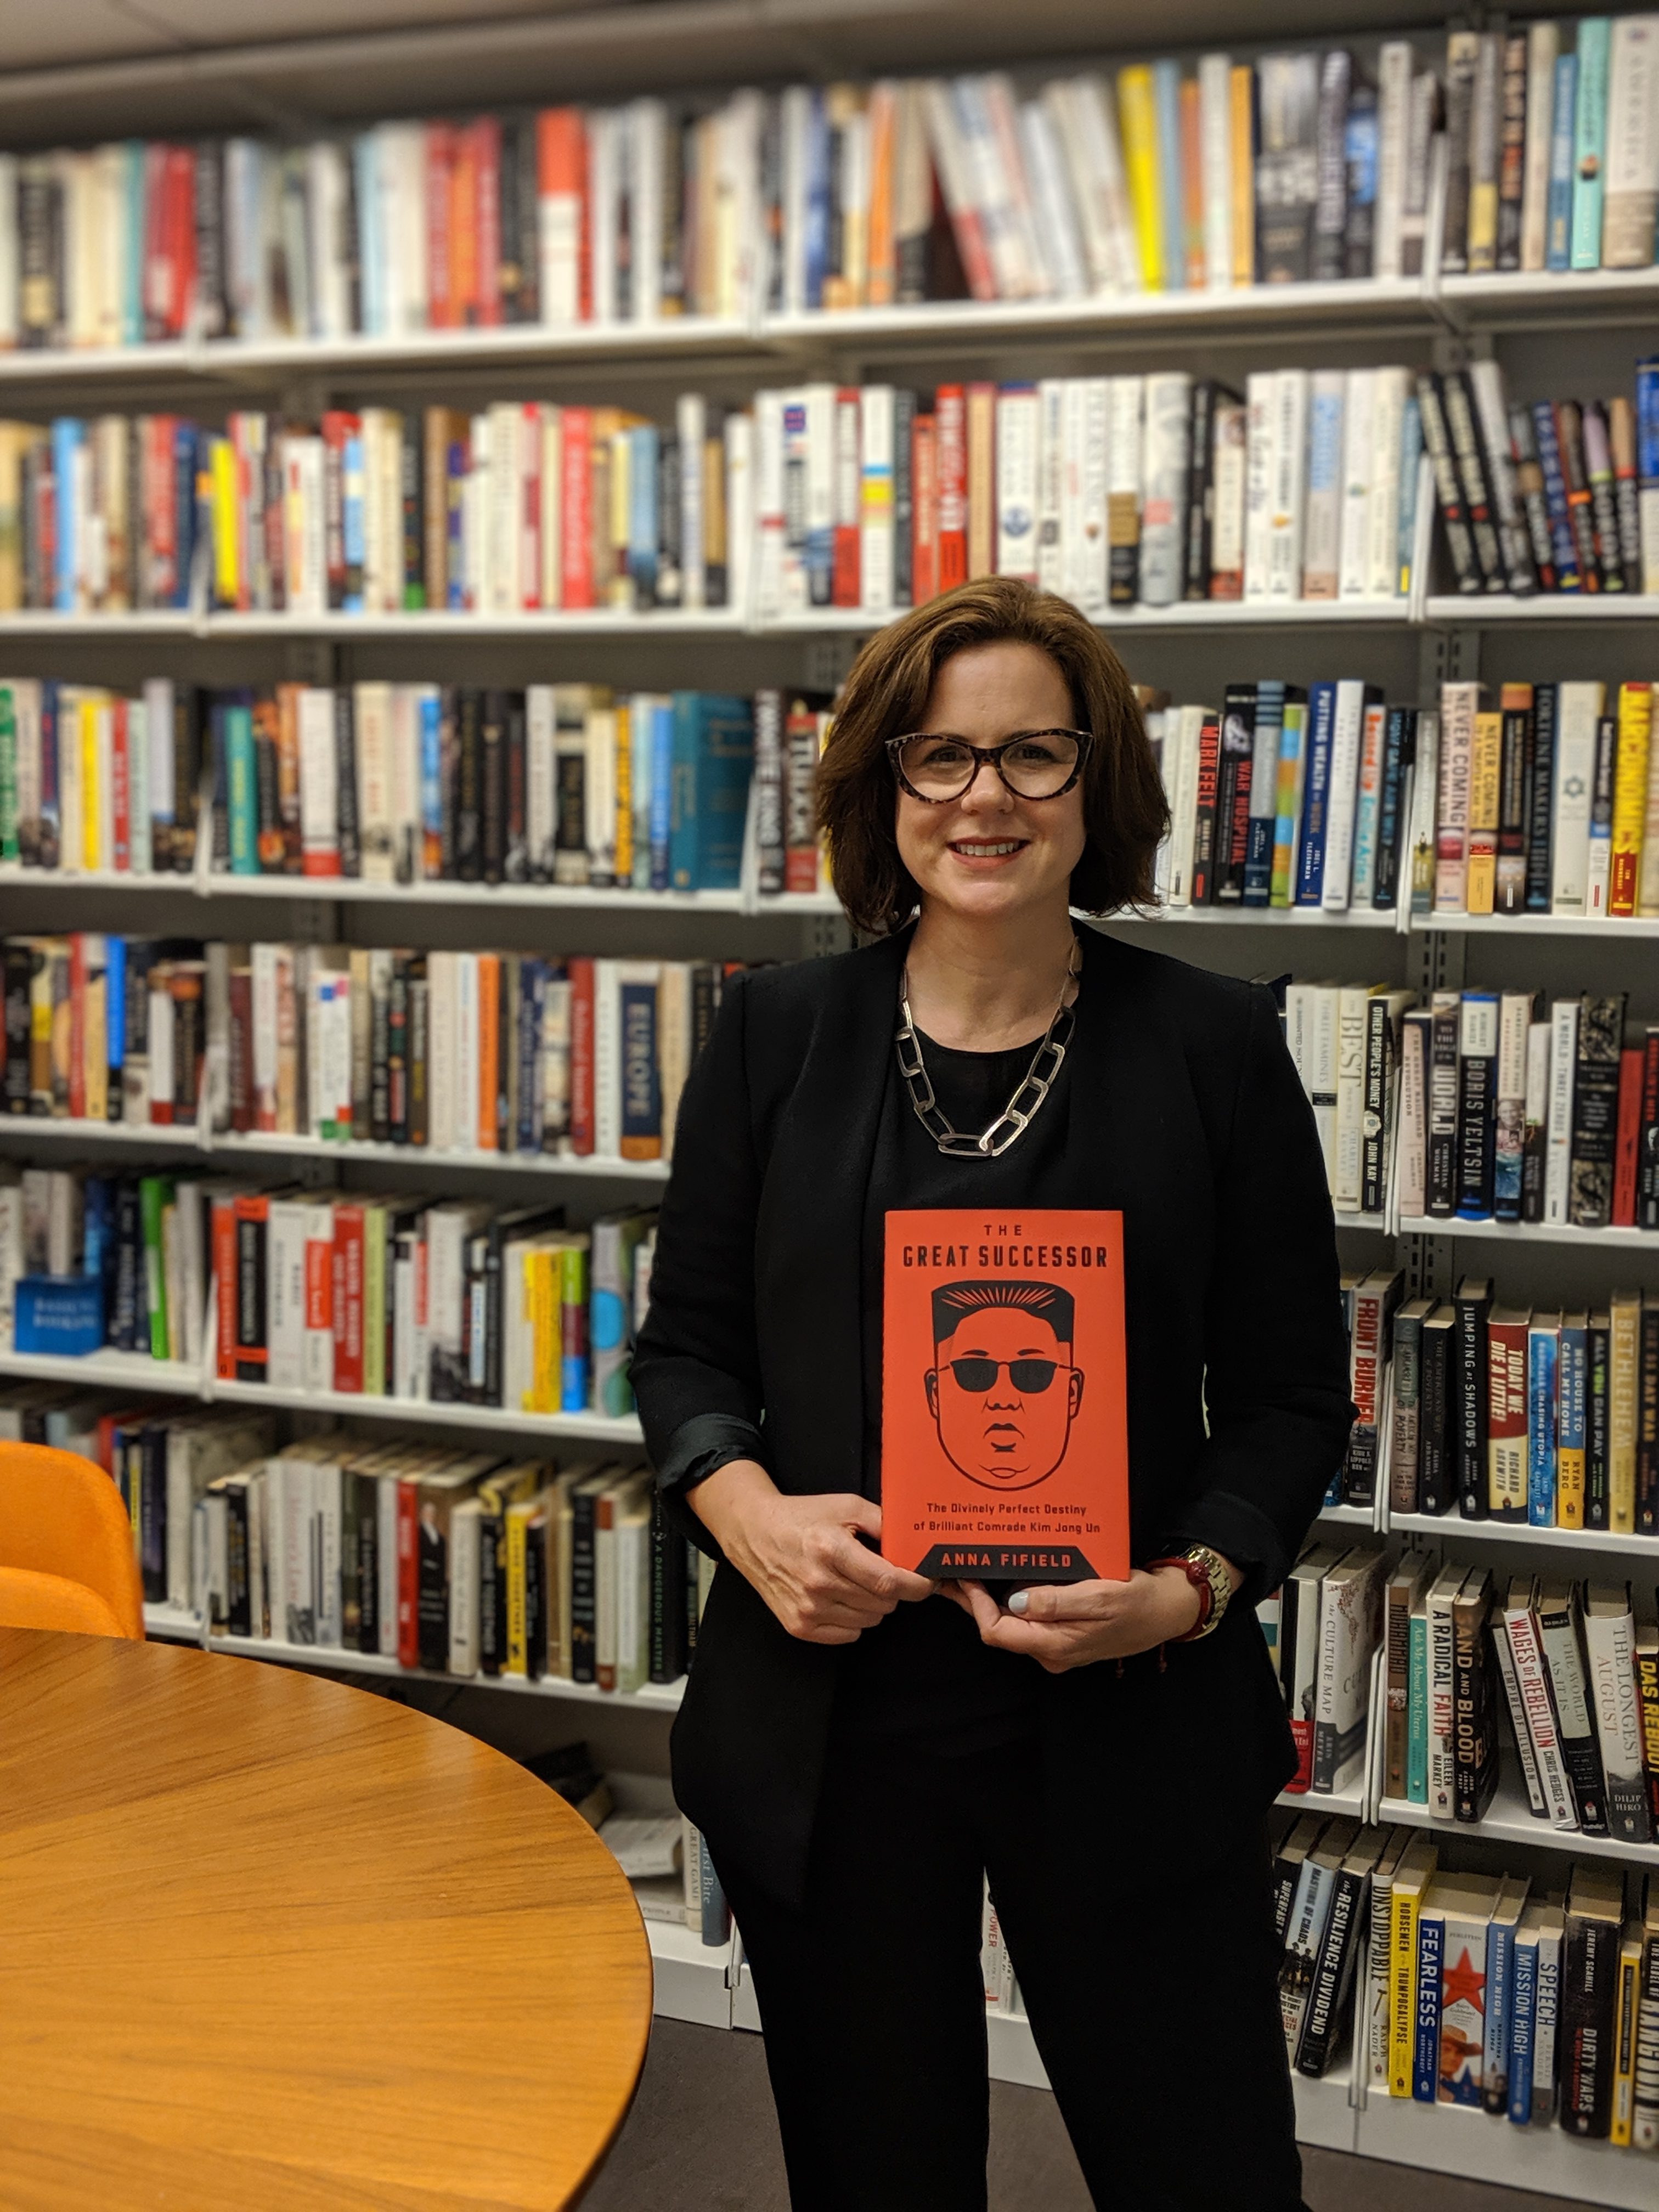 Fifield with her book, “The Great Successor: The Divinely Perfect Destiny of Brilliant Comrade Kim Jong Un,” published June 11 by PublicAffairs